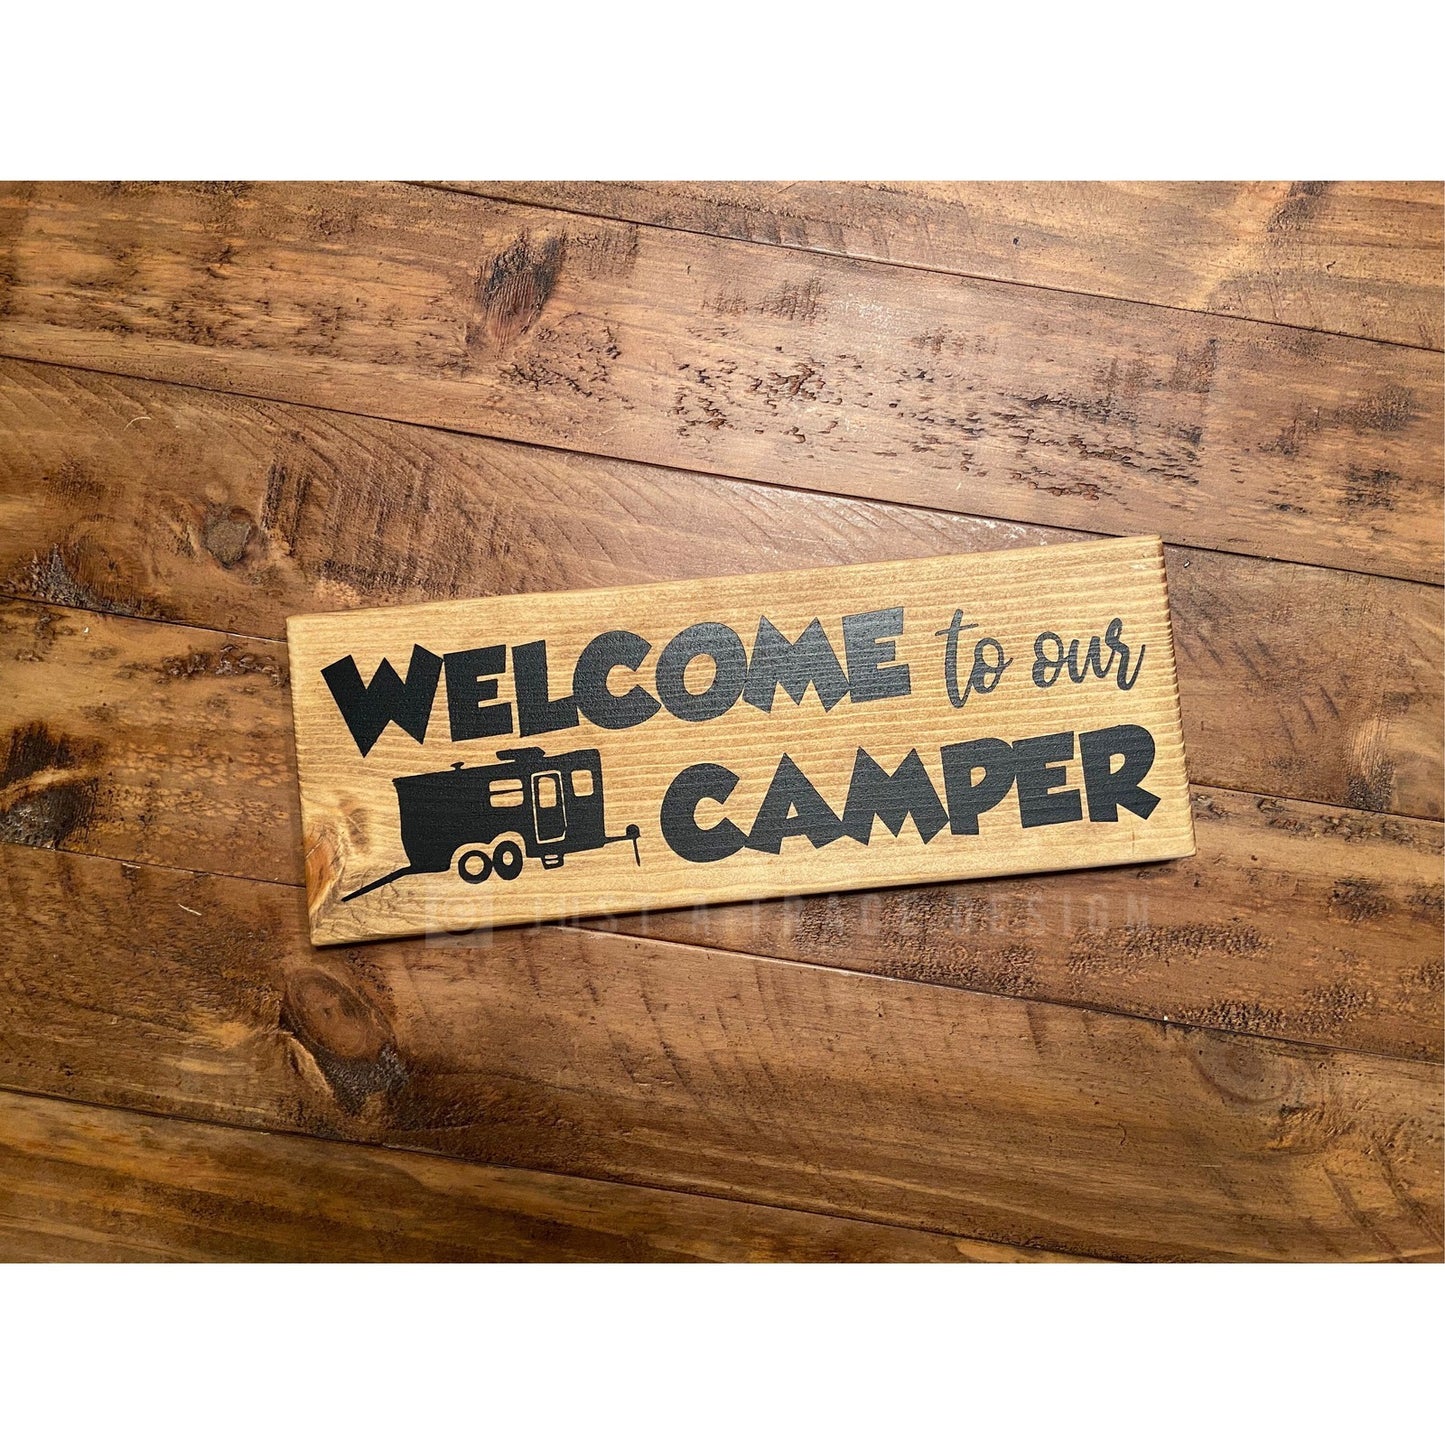 Welcome To Our Camper Sign - Wooden Sign - Wall Decor - Home Decor - Camper - Camping - Outdoors - 12" x 4.25"